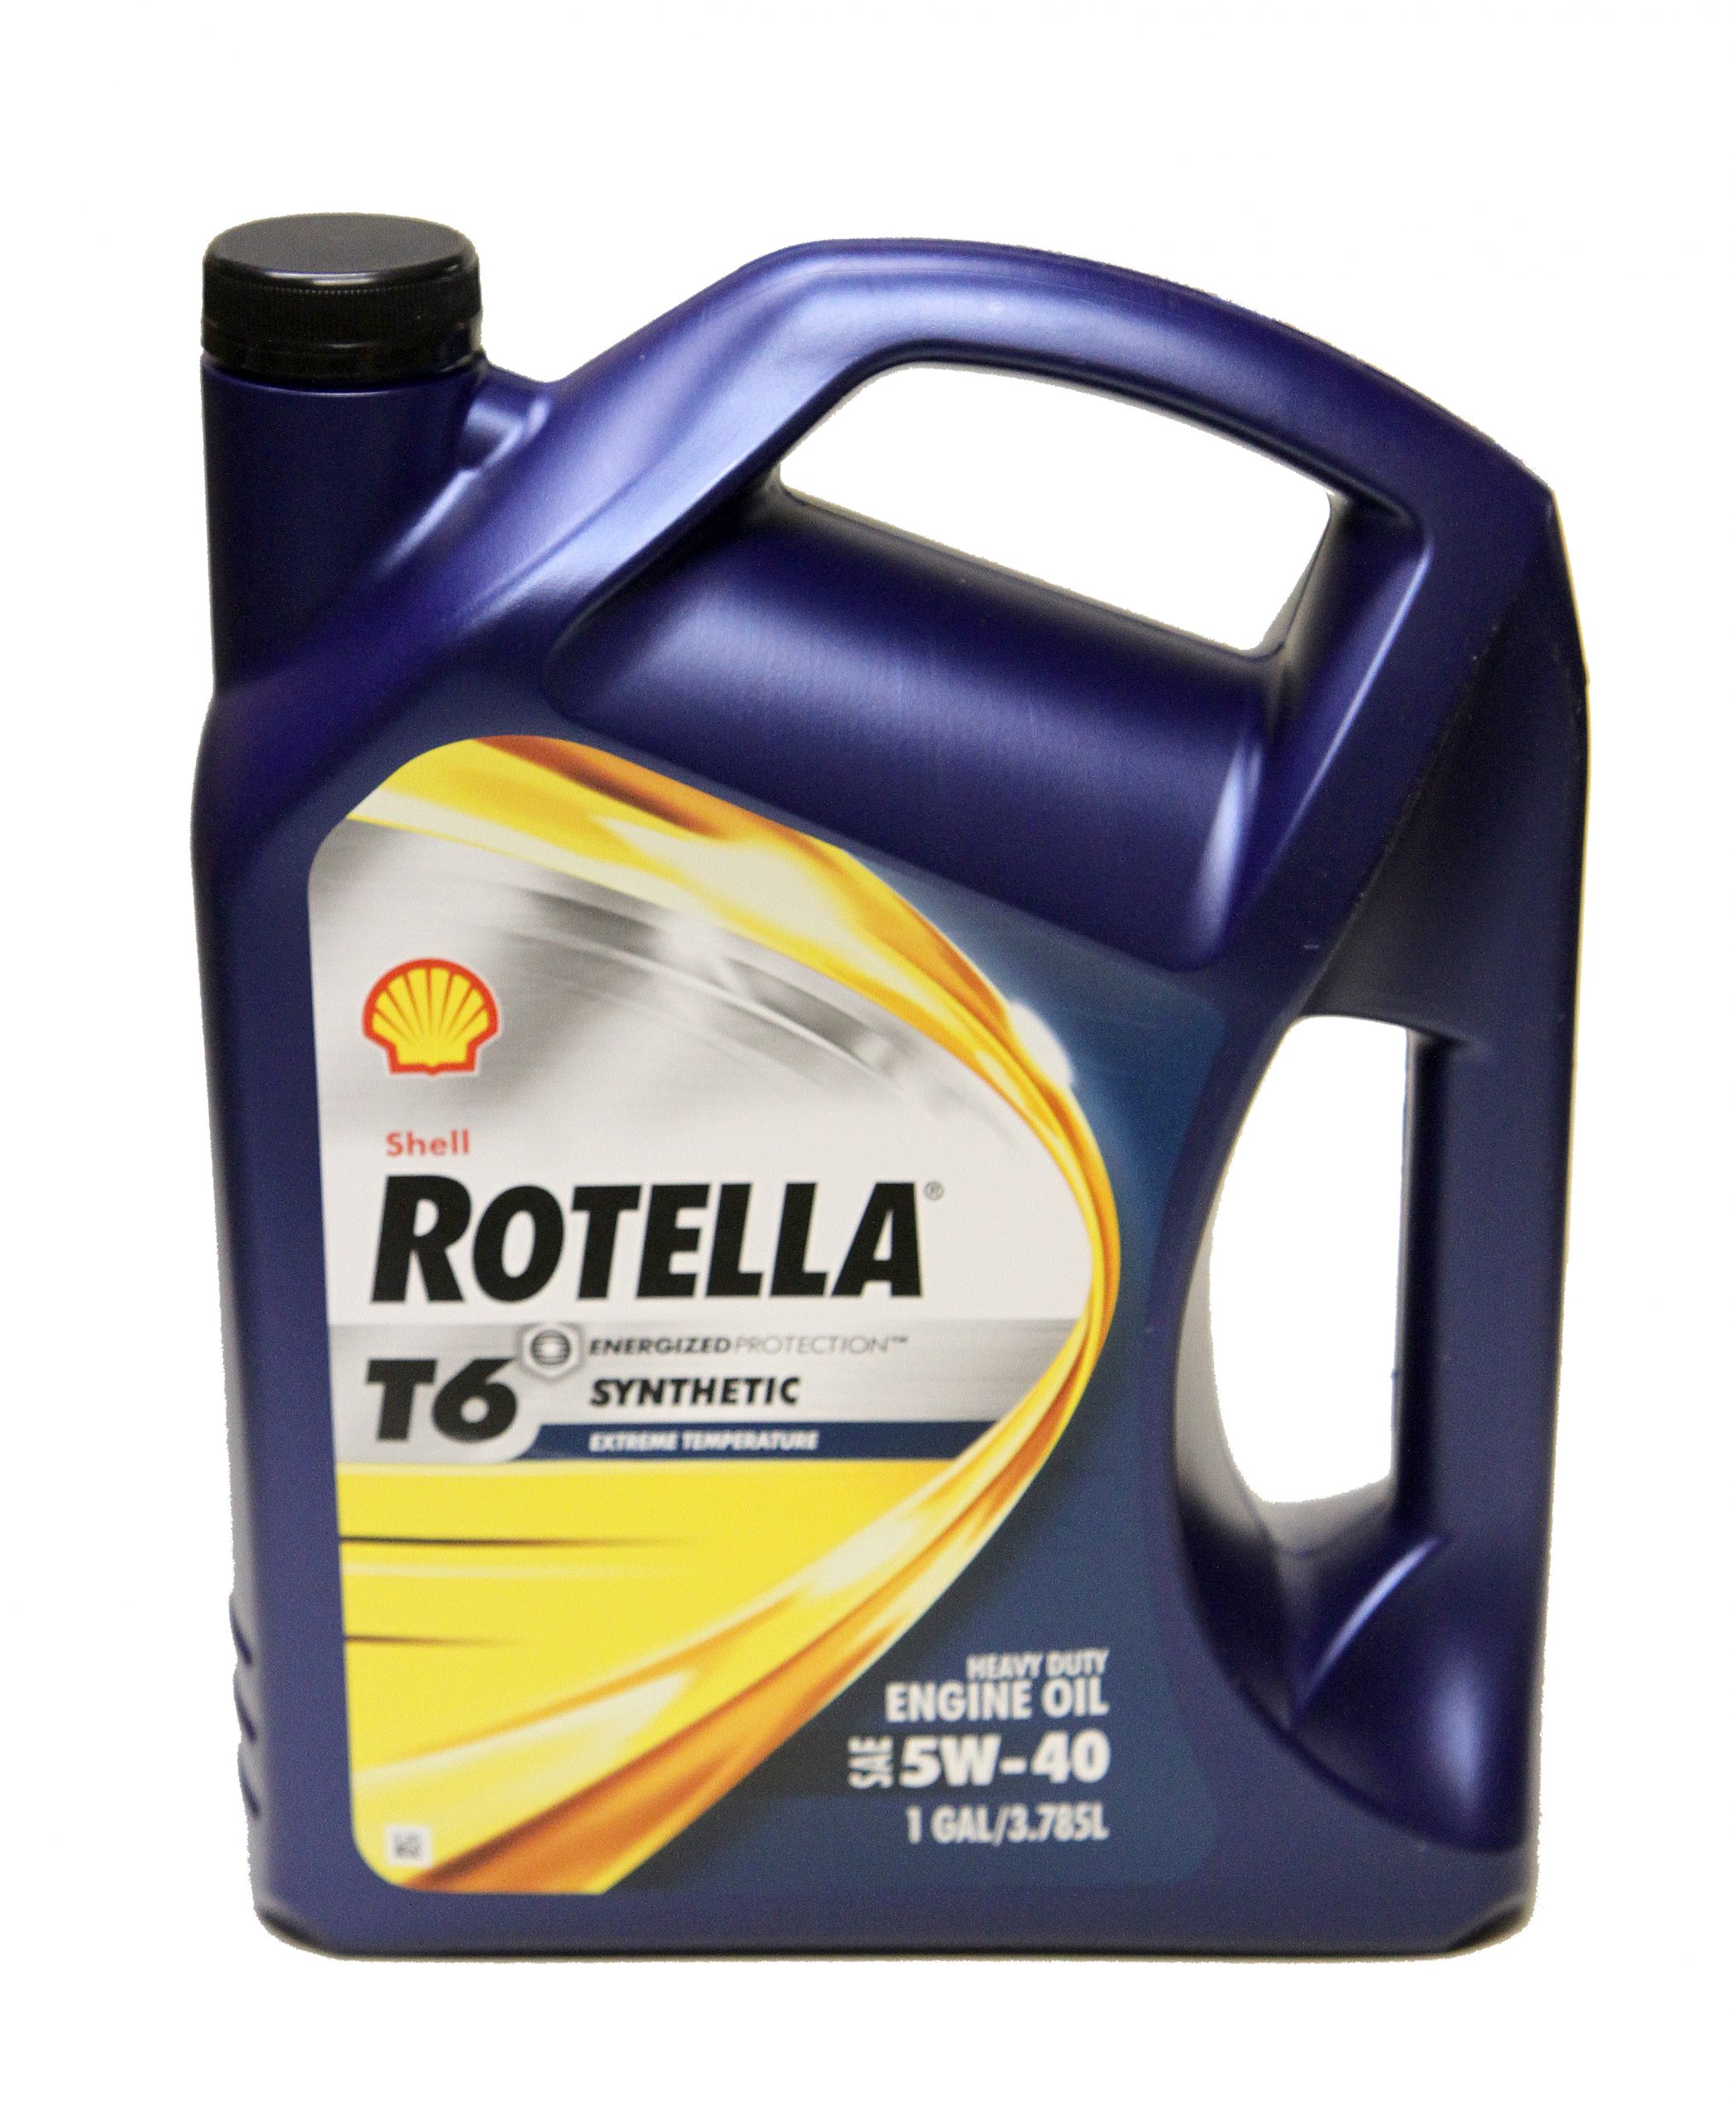 Shell's Rotella Synthetic Oil